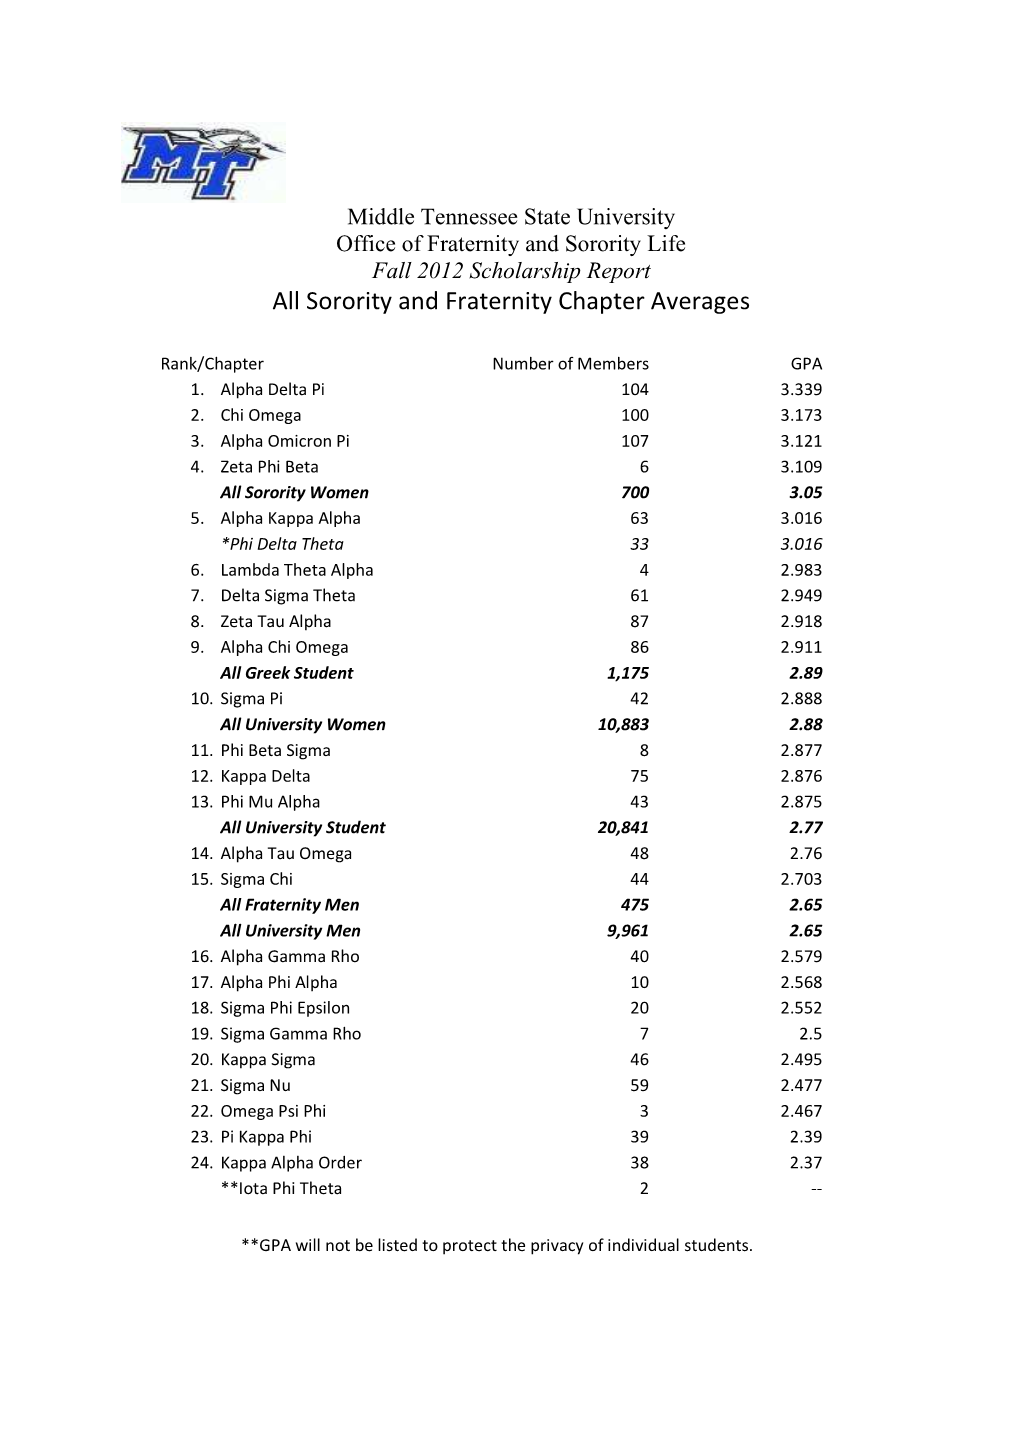 Fall 2012 Scholarship Report All Sorority and Fraternity Chapter Averages